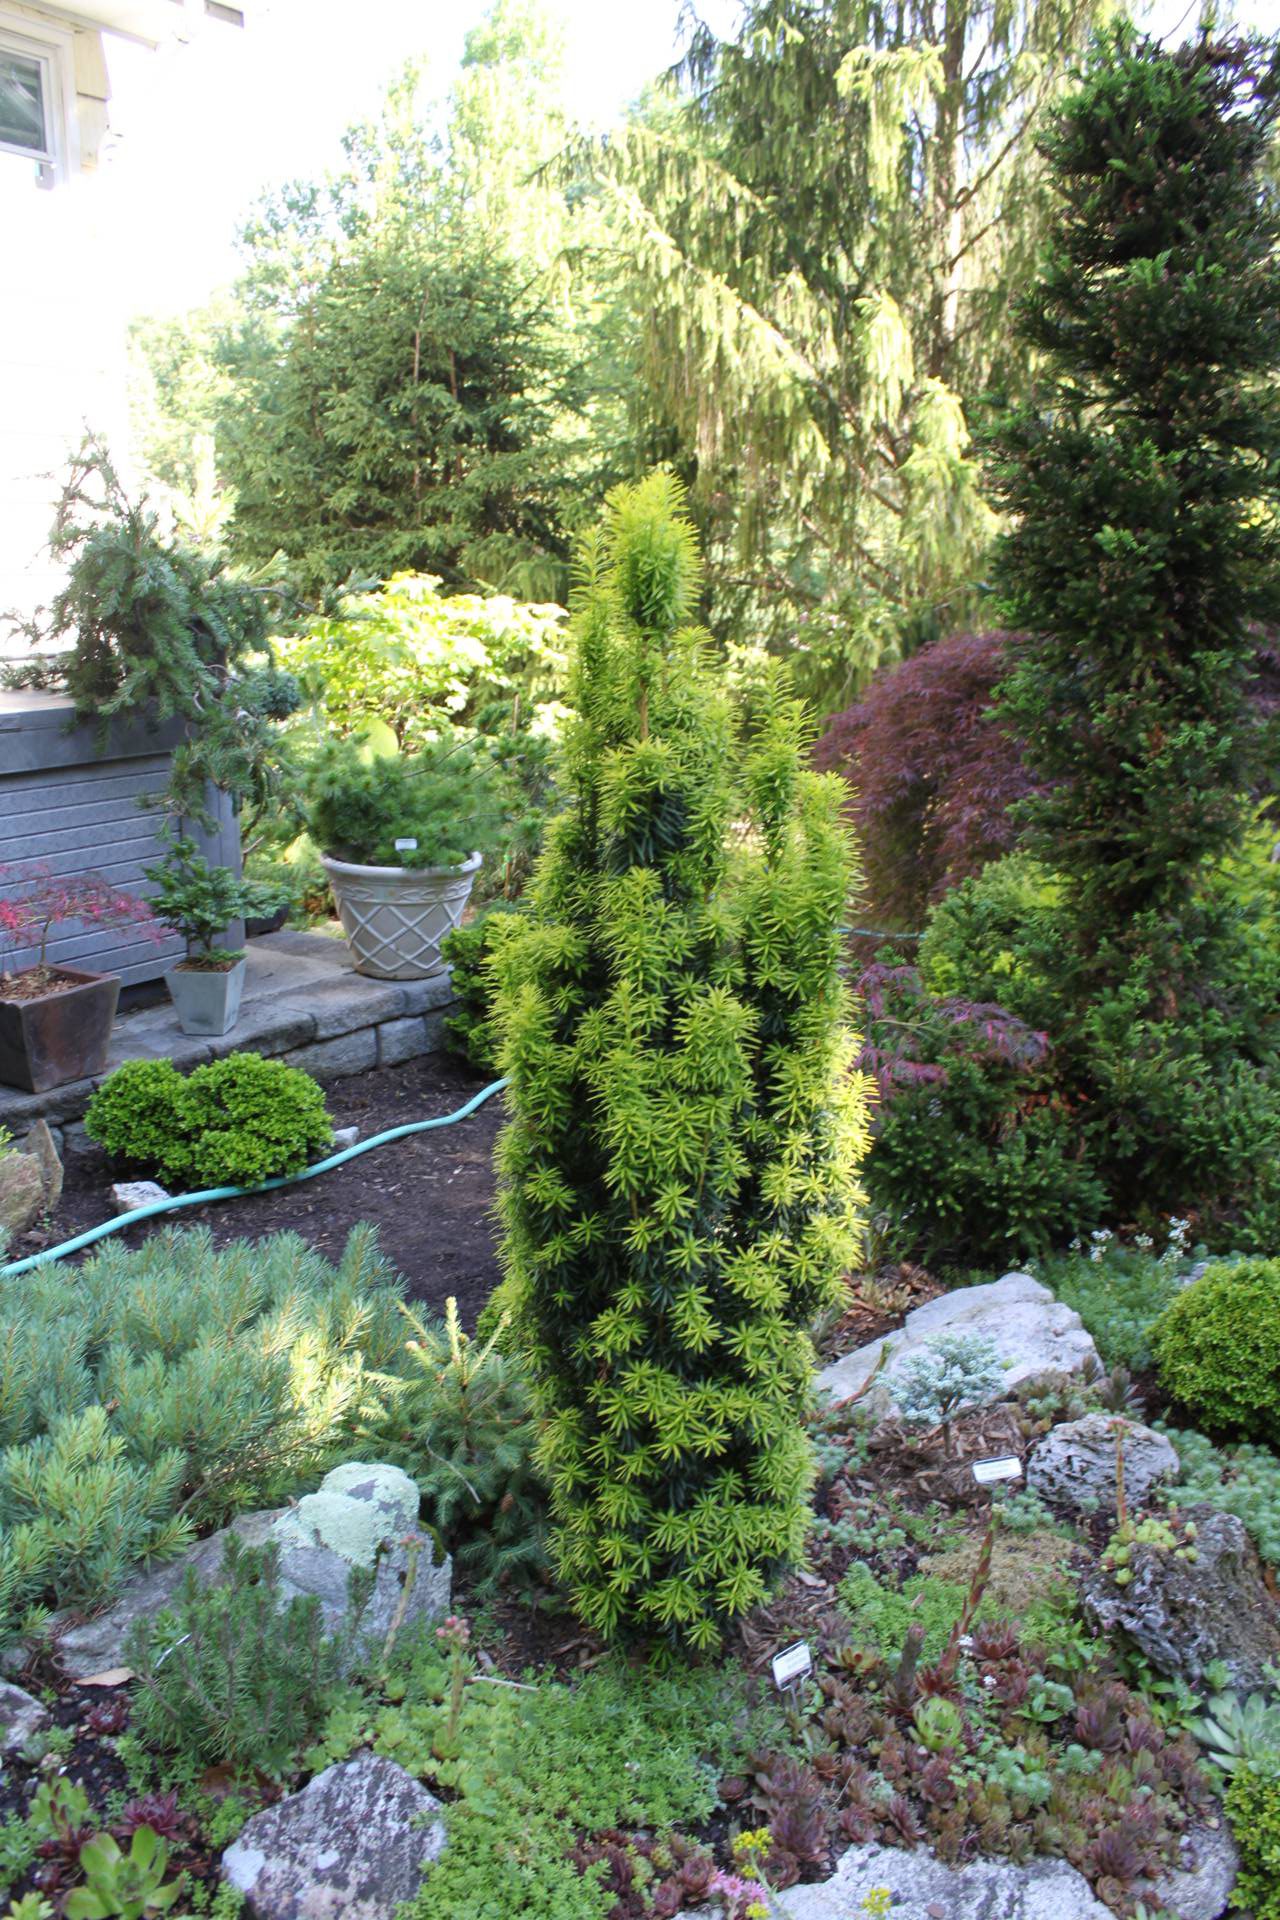 Taxus baccata Silver Spire conifer green gold silver variegated needles